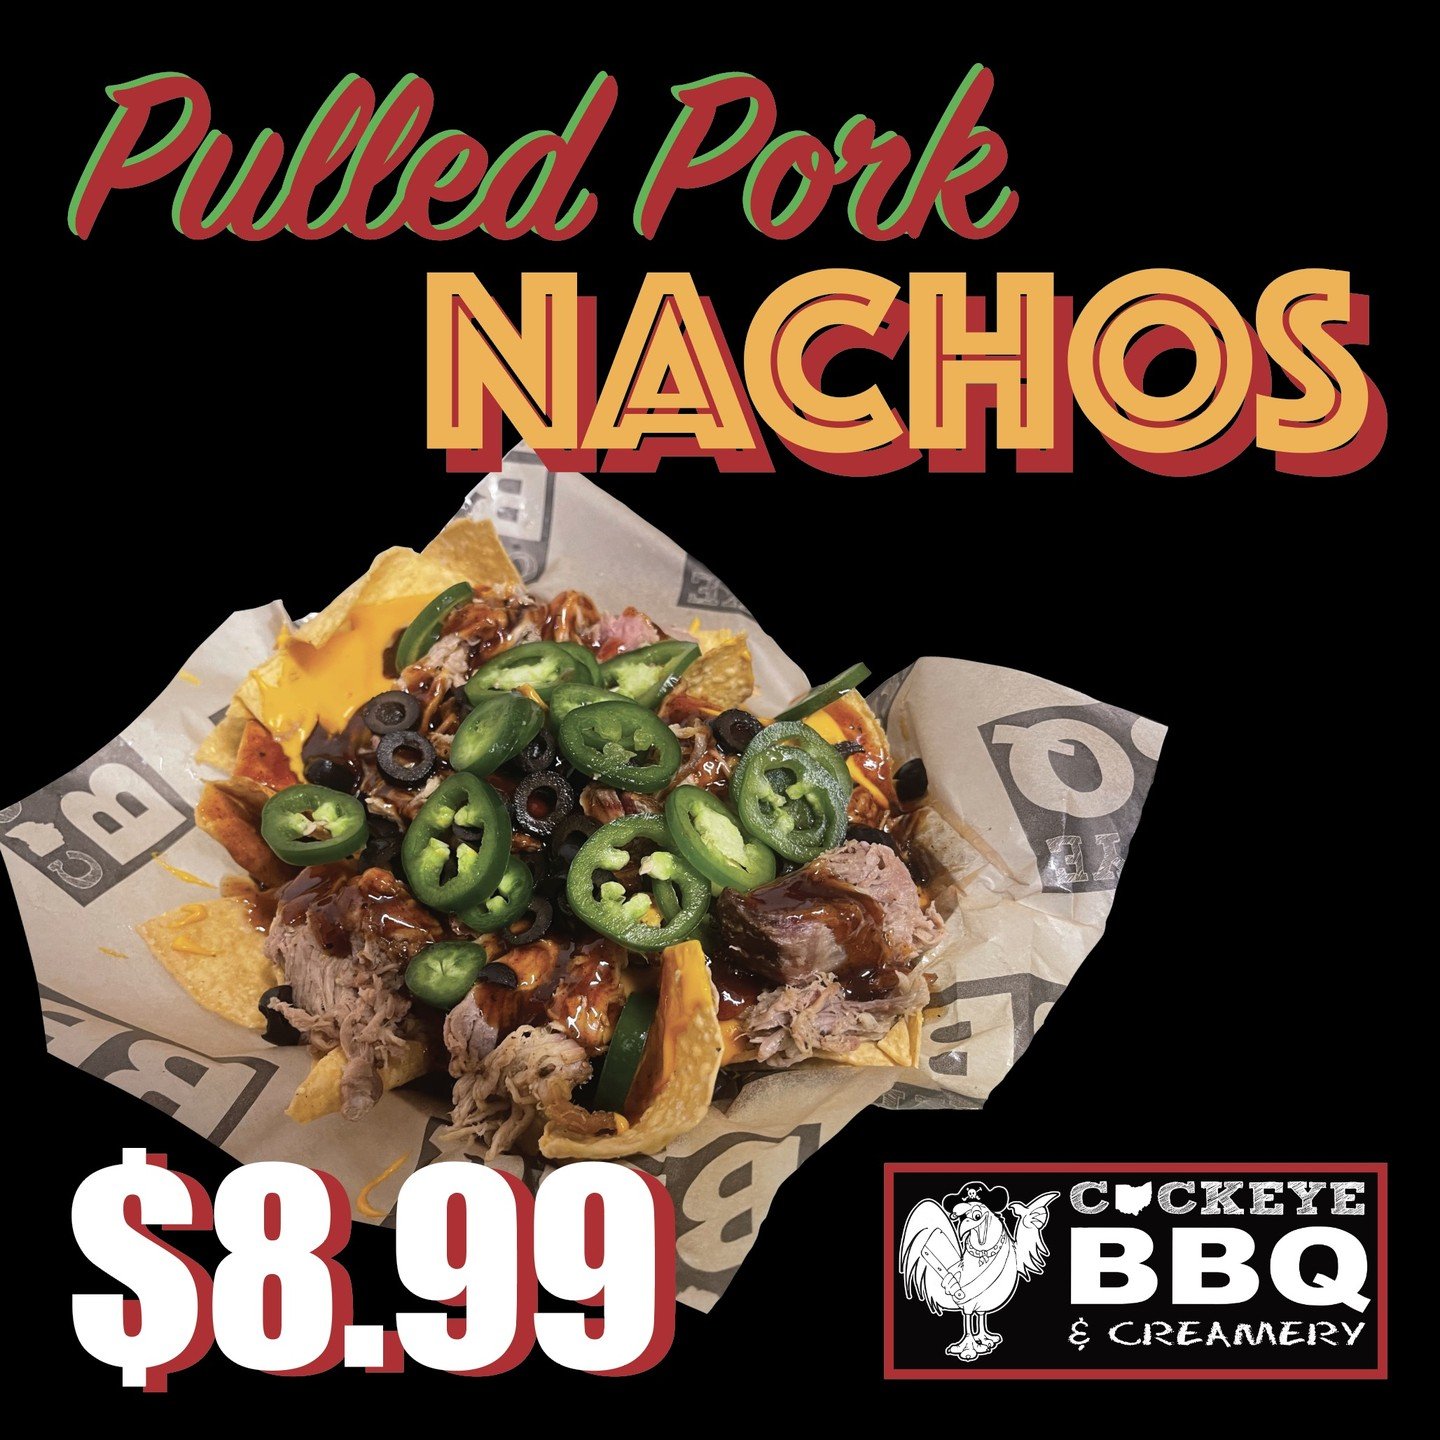 The Cinco De Mayo Specials Keep on Coming!
Some of you might remember this one from a few years ago when it was on our full time menu.
PULLED PORK NACHOS! Fresh Fried Corn Tortilla Chips, Hand-Pulled Pork, Nacho Cheese, Original BBQ Sauce, House-Pick